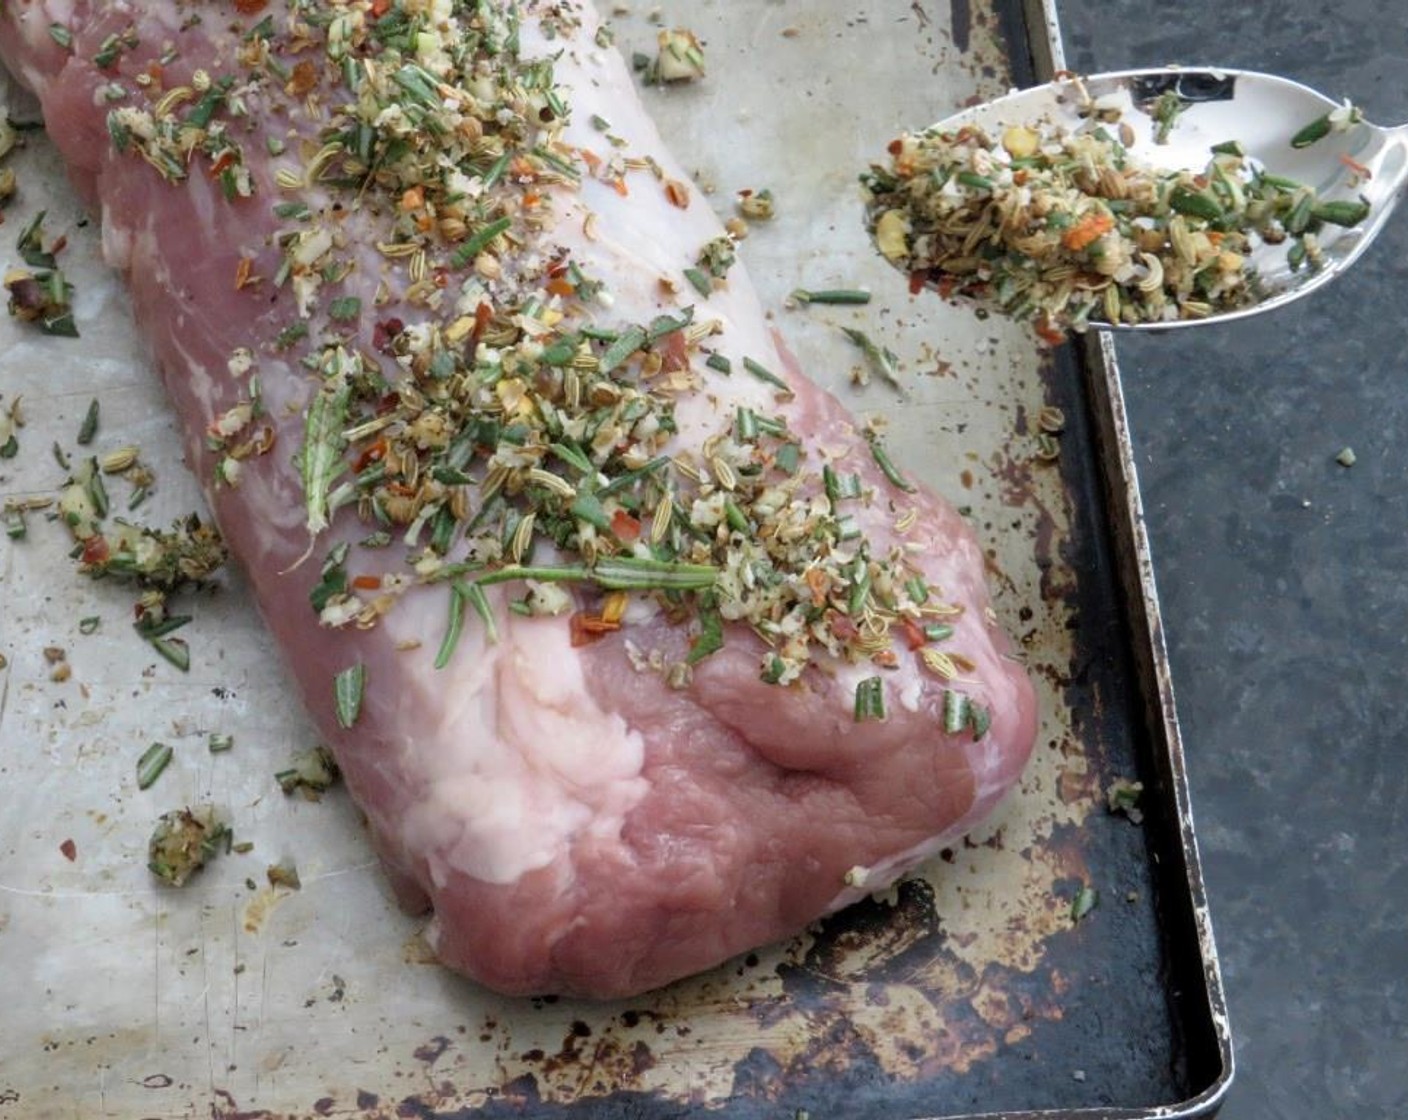 step 3 Place the Pork Tenderloin (1 lb) on a baking sheet and rub Olive Oil (1 Tbsp) over it with your hands. Sprinkle spice mixture over the pork and rub it in. There should be enough spice to liberally cover the entire tenderloin.